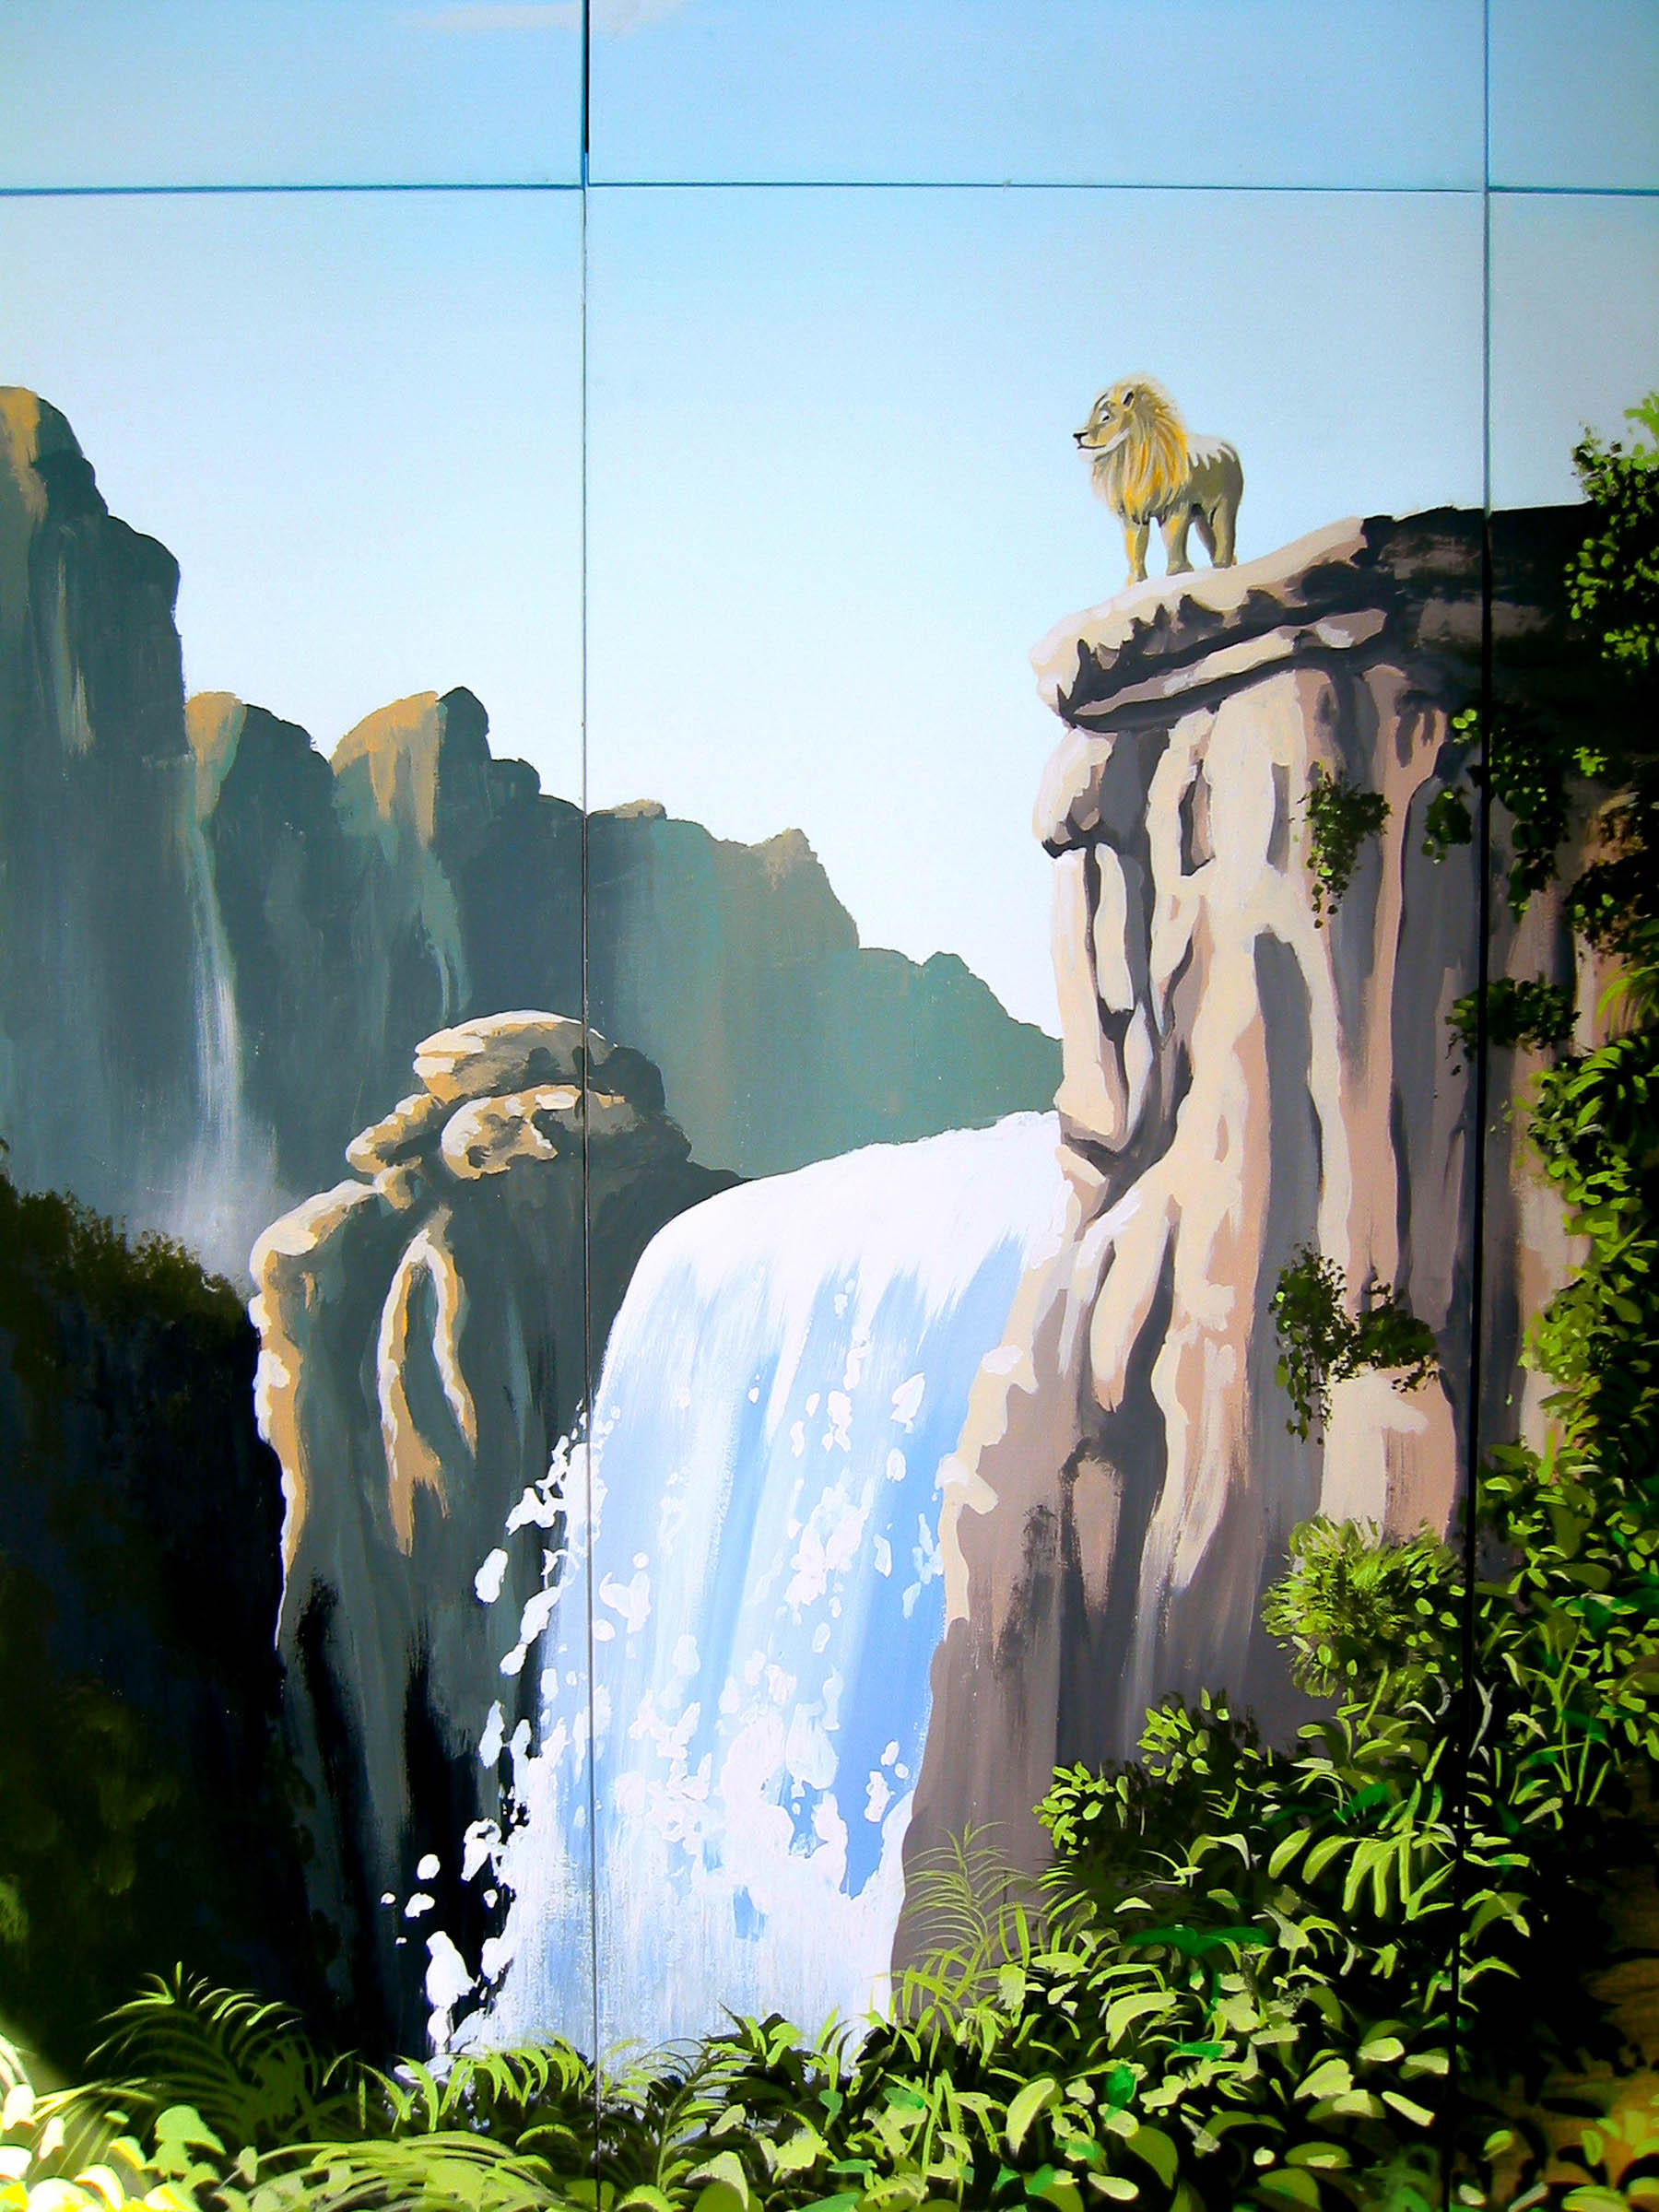 Waterfall and lion standing on the rocks painted on the doors of this fitted wardrobe.